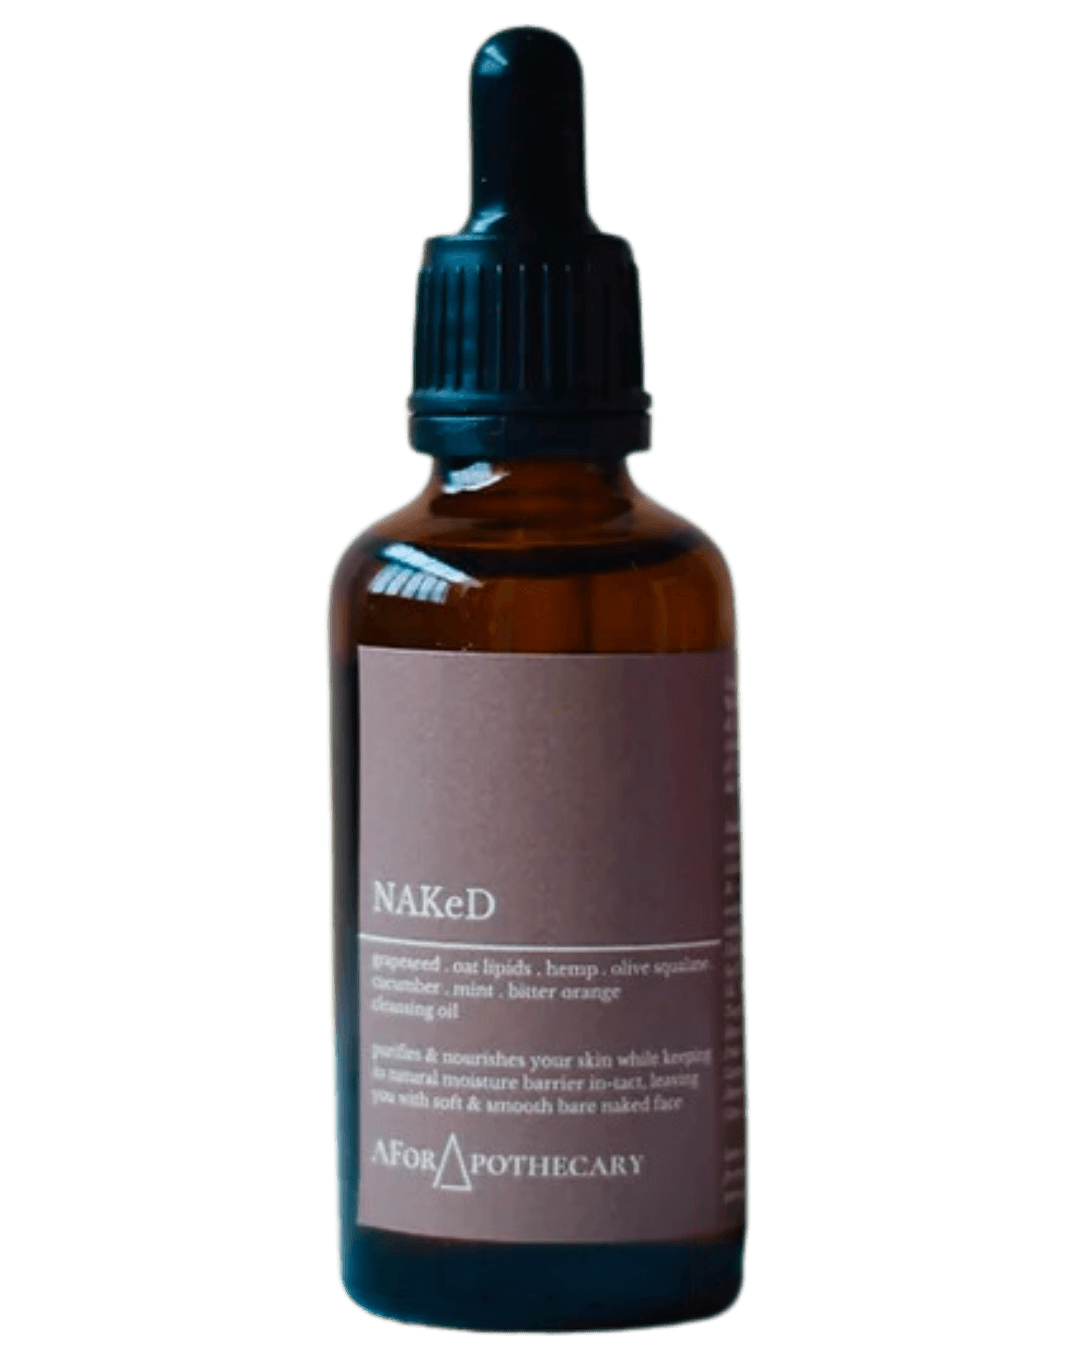 A For Apothecary Naked Cleansing Oil